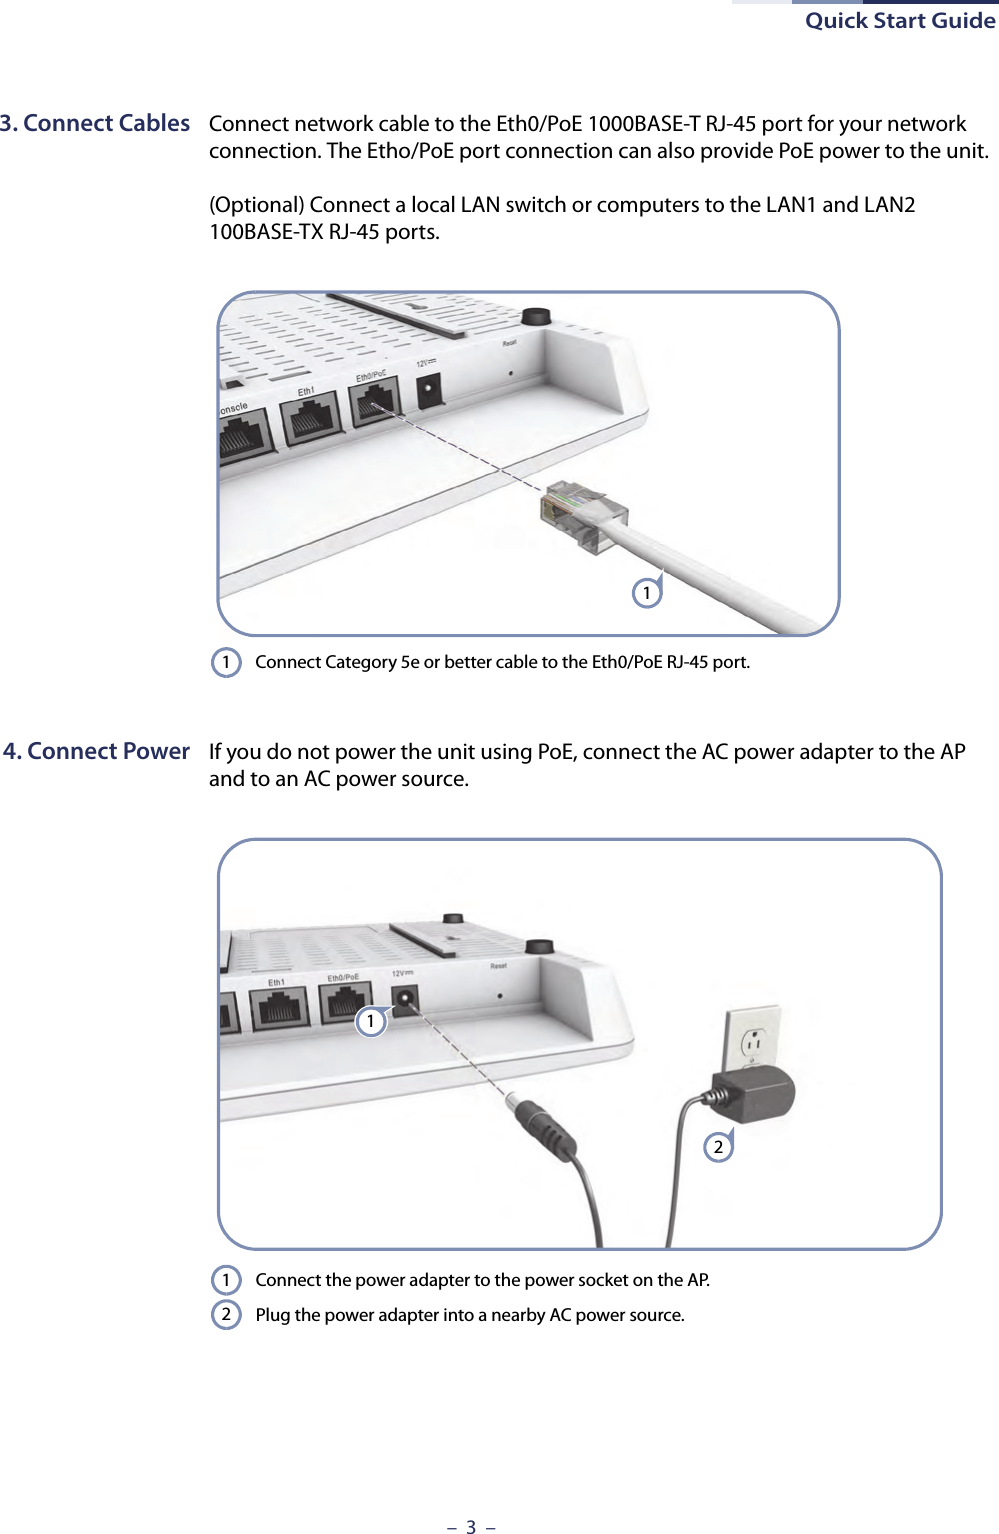 Quick Start Guide–  3  –3. Connect Cables Connect network cable to the Eth0/PoE 1000BASE-T RJ-45 port for your network connection. The Etho/PoE port connection can also provide PoE power to the unit.(Optional) Connect a local LAN switch or computers to the LAN1 and LAN2 100BASE-TX RJ-45 ports.4. Connect Power If you do not power the unit using PoE, connect the AC power adapter to the AP and to an AC power source.Connect Category 5e or better cable to the Eth0/PoE RJ-45 port.11Connect the power adapter to the power socket on the AP. Plug the power adapter into a nearby AC power source.1212